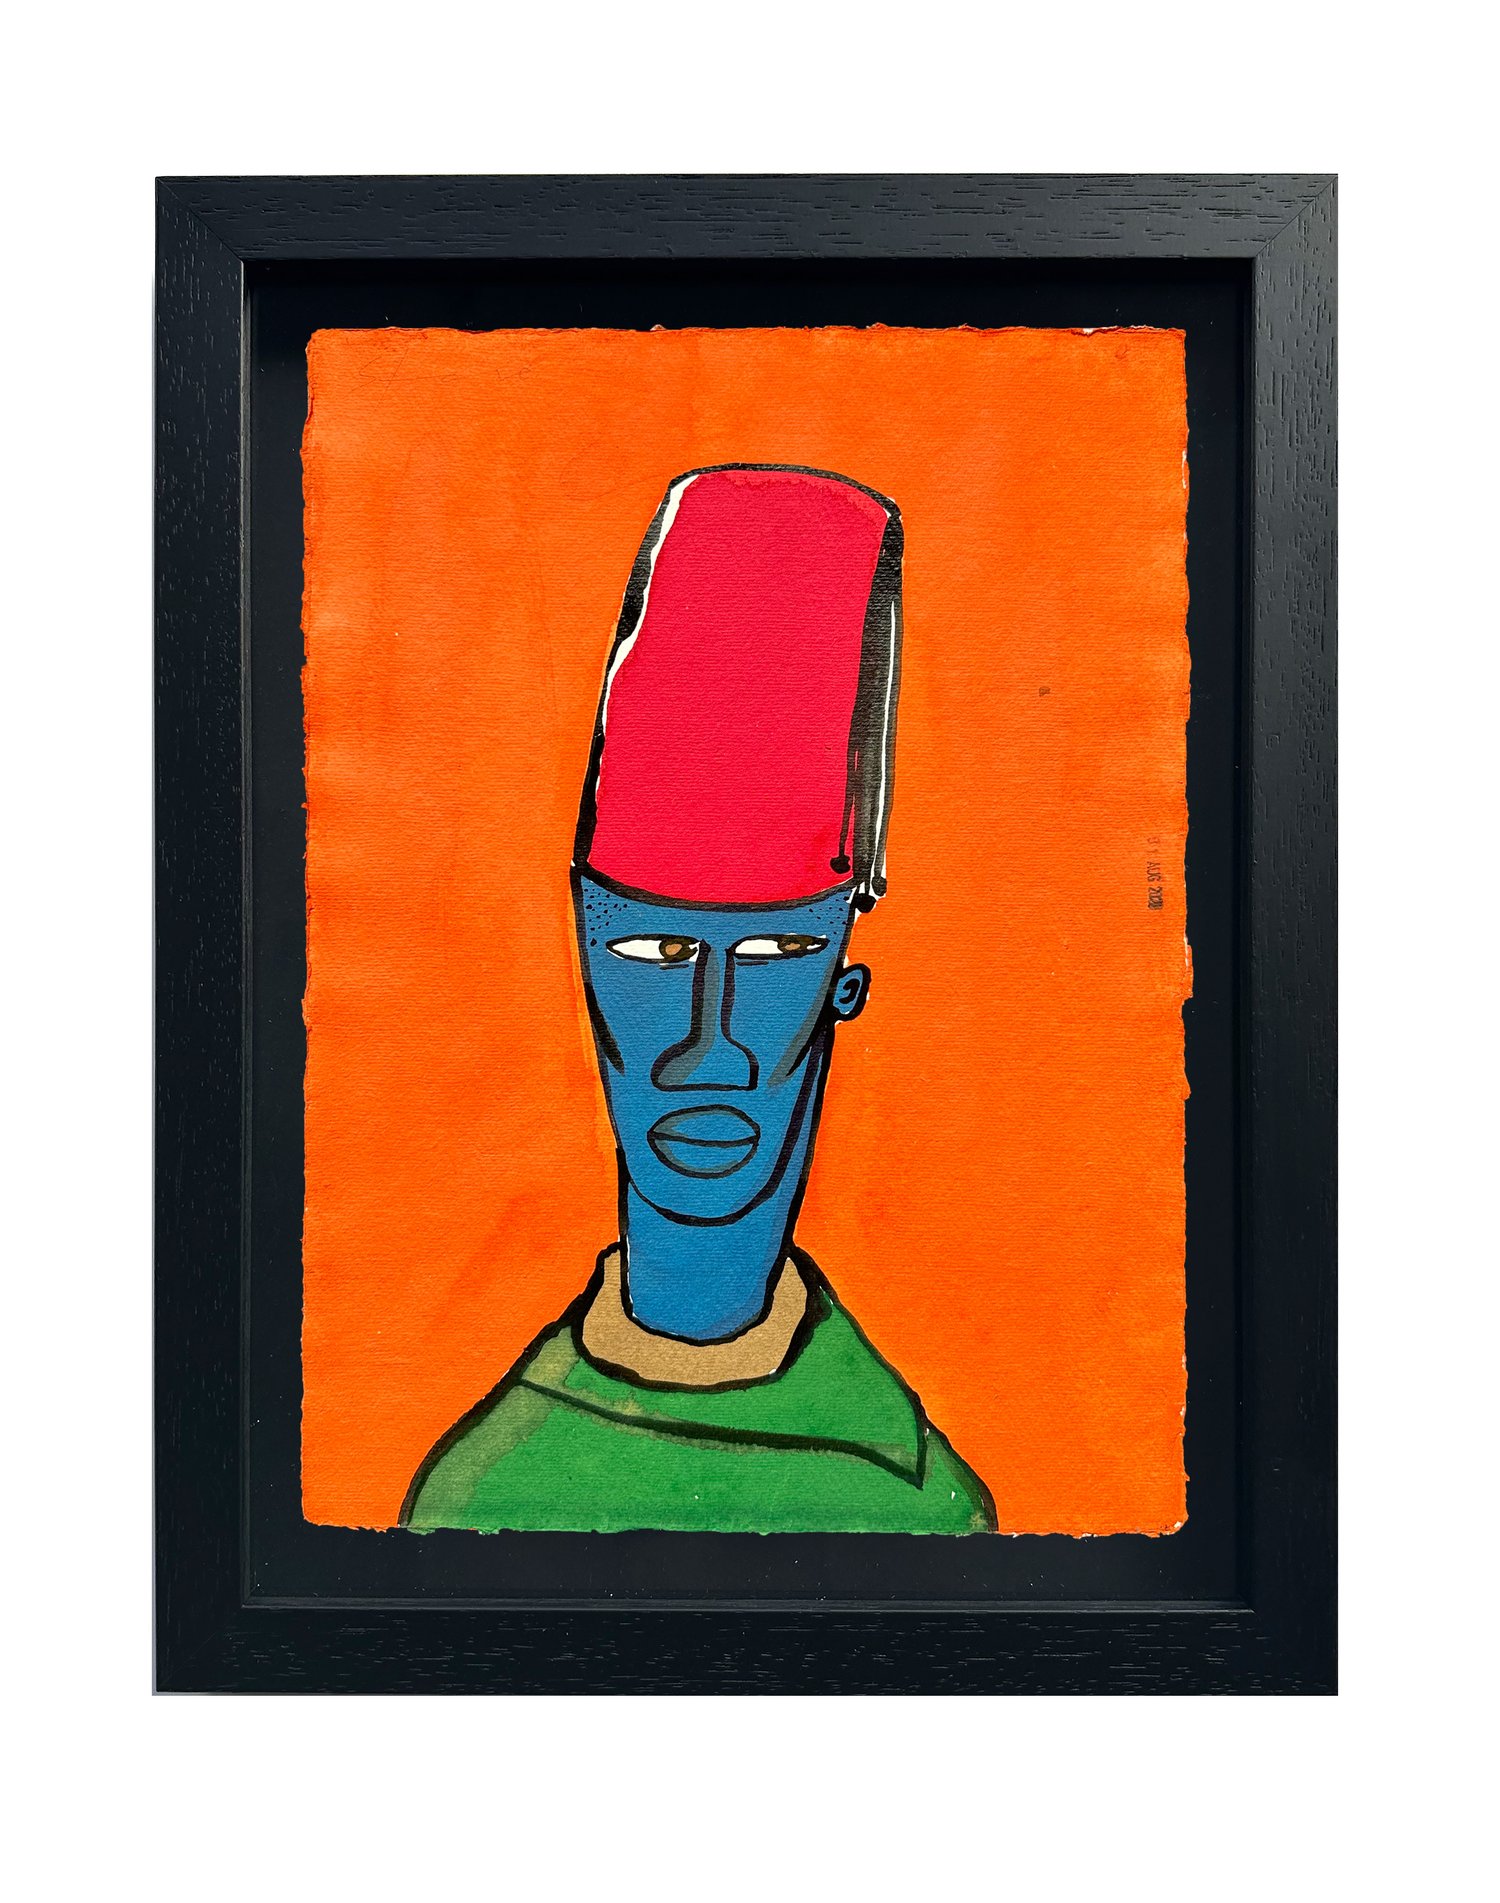 Image of 'Boy in Red Fez' by STEPHEN ANTHONY DAVIDS